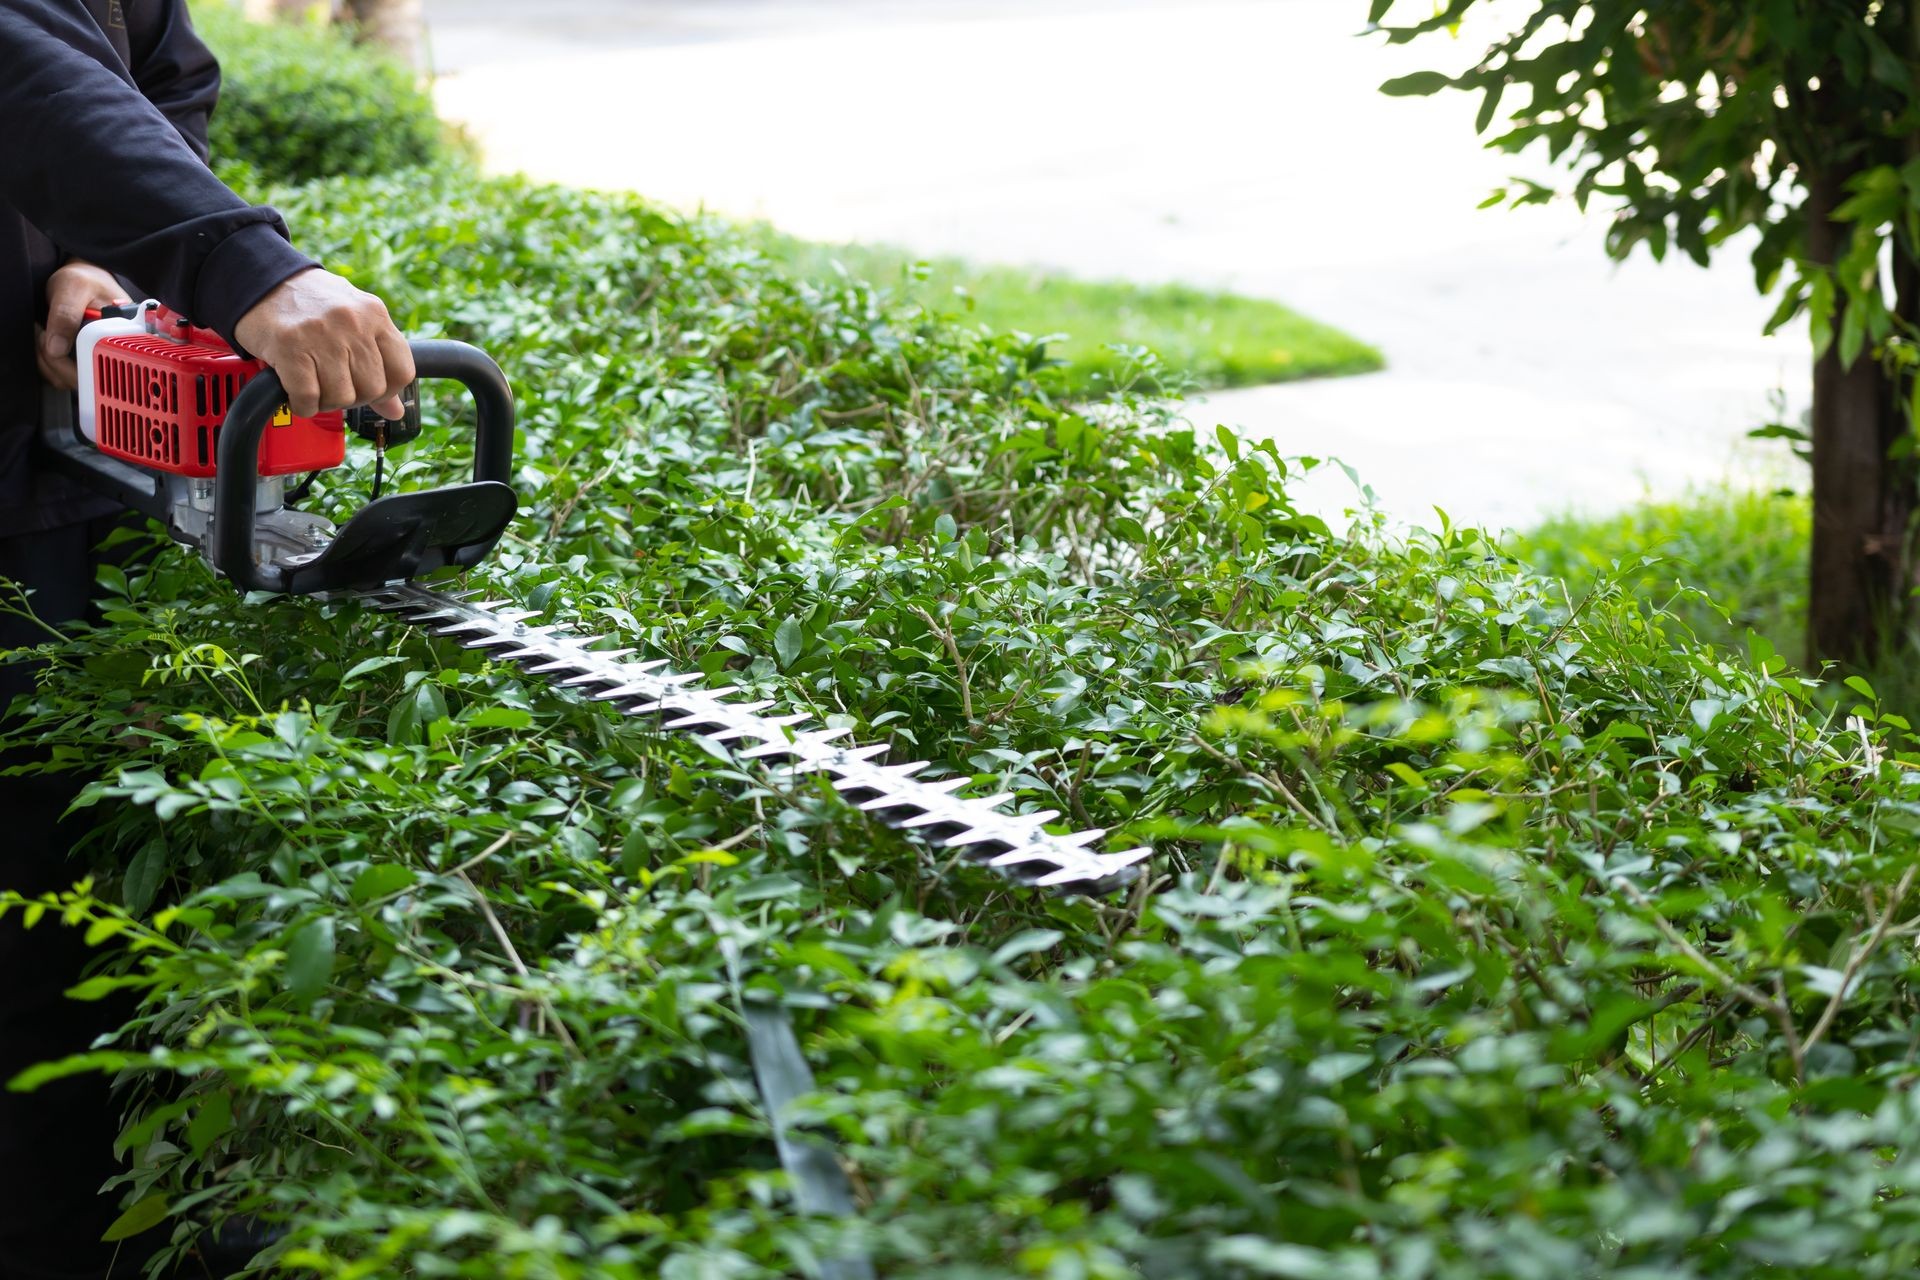 Home and garden concept. Hedge trimmer in action. Bush trimming work. Shrubs pruning. Gardening and cutting activities.